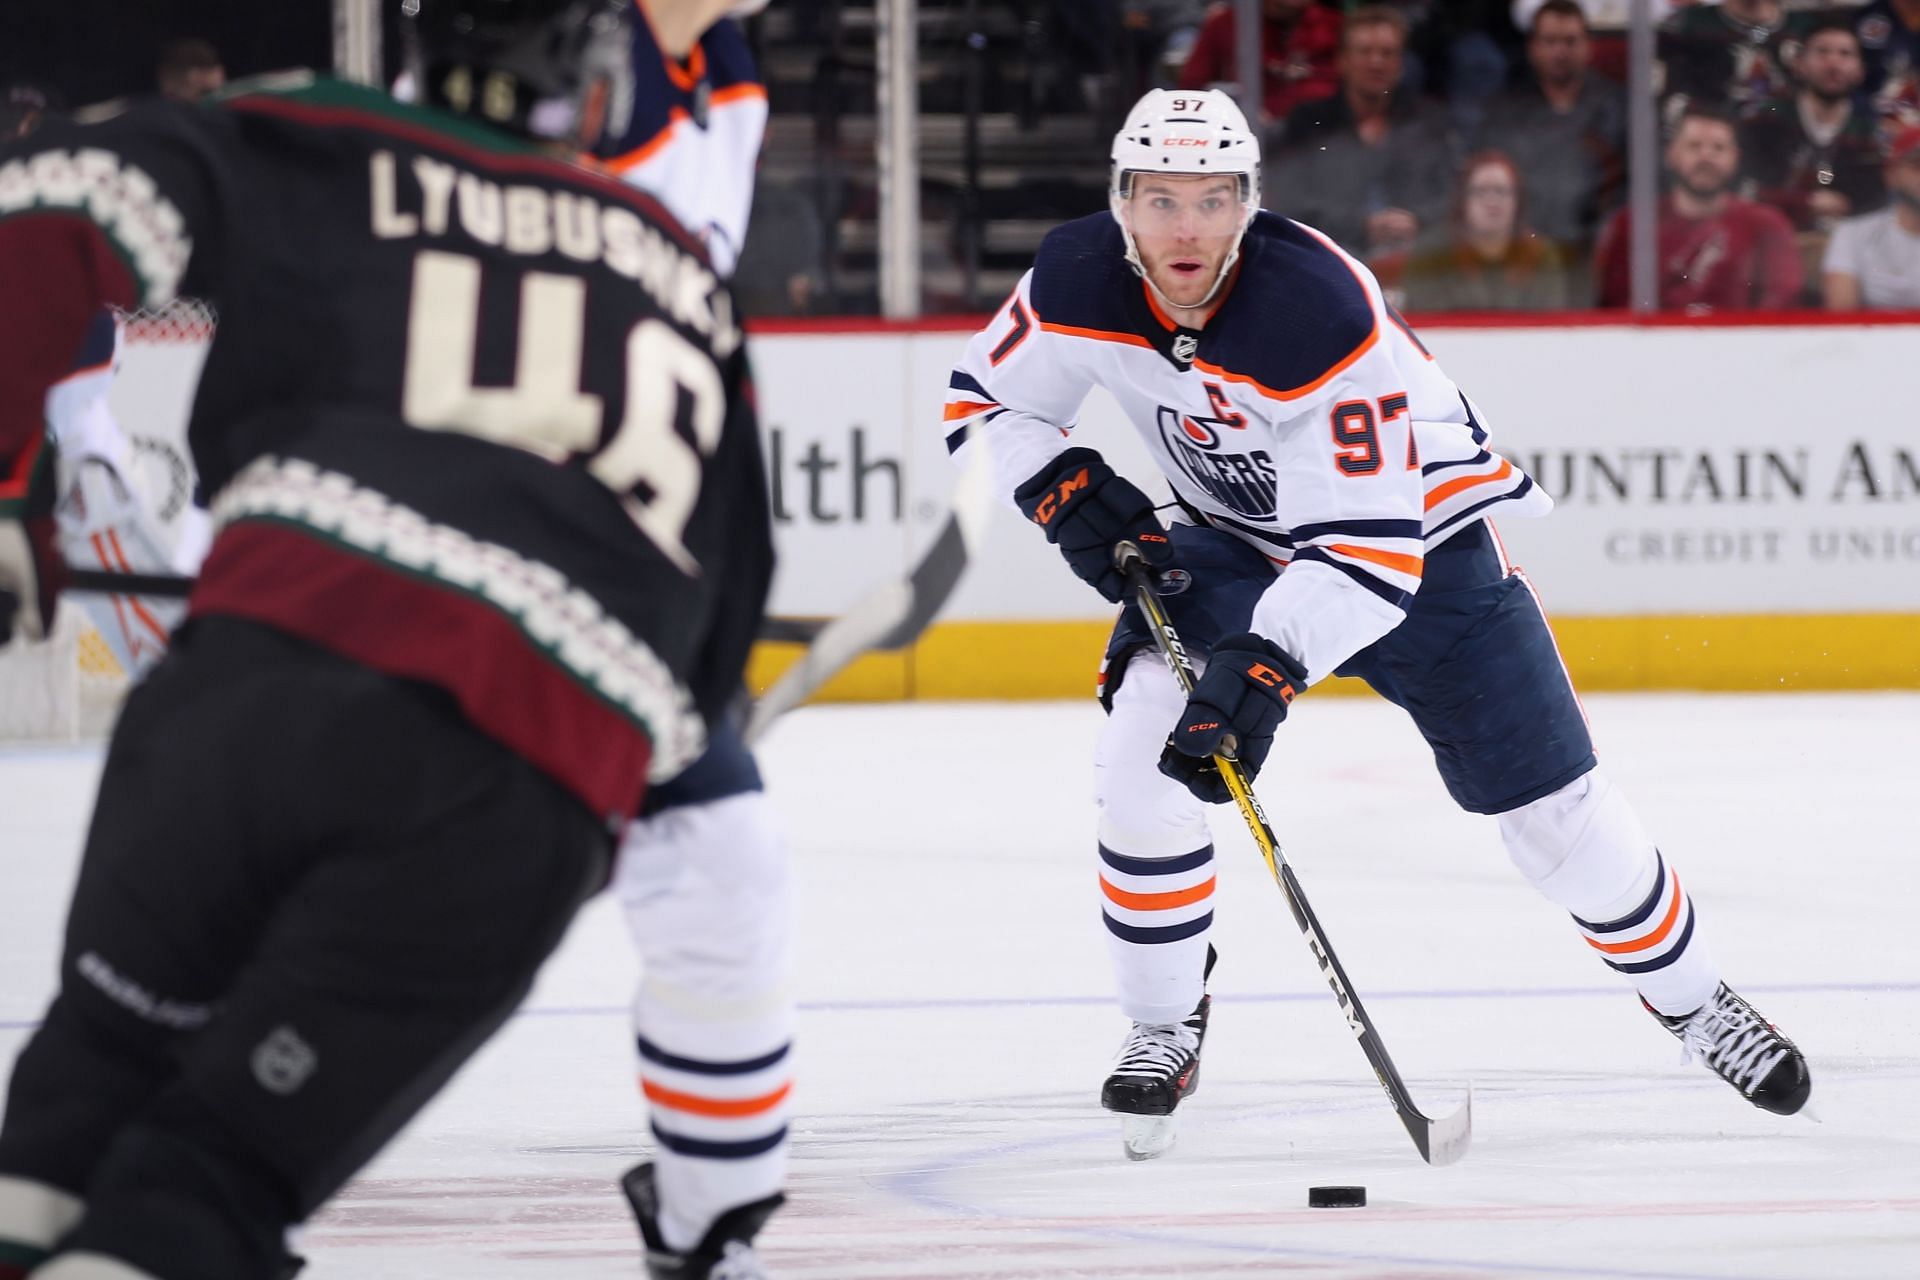 Arizona Coyotes vs Edmonton Oilers Live streaming options, how and where to watch NHL live on TV, Channel List and more